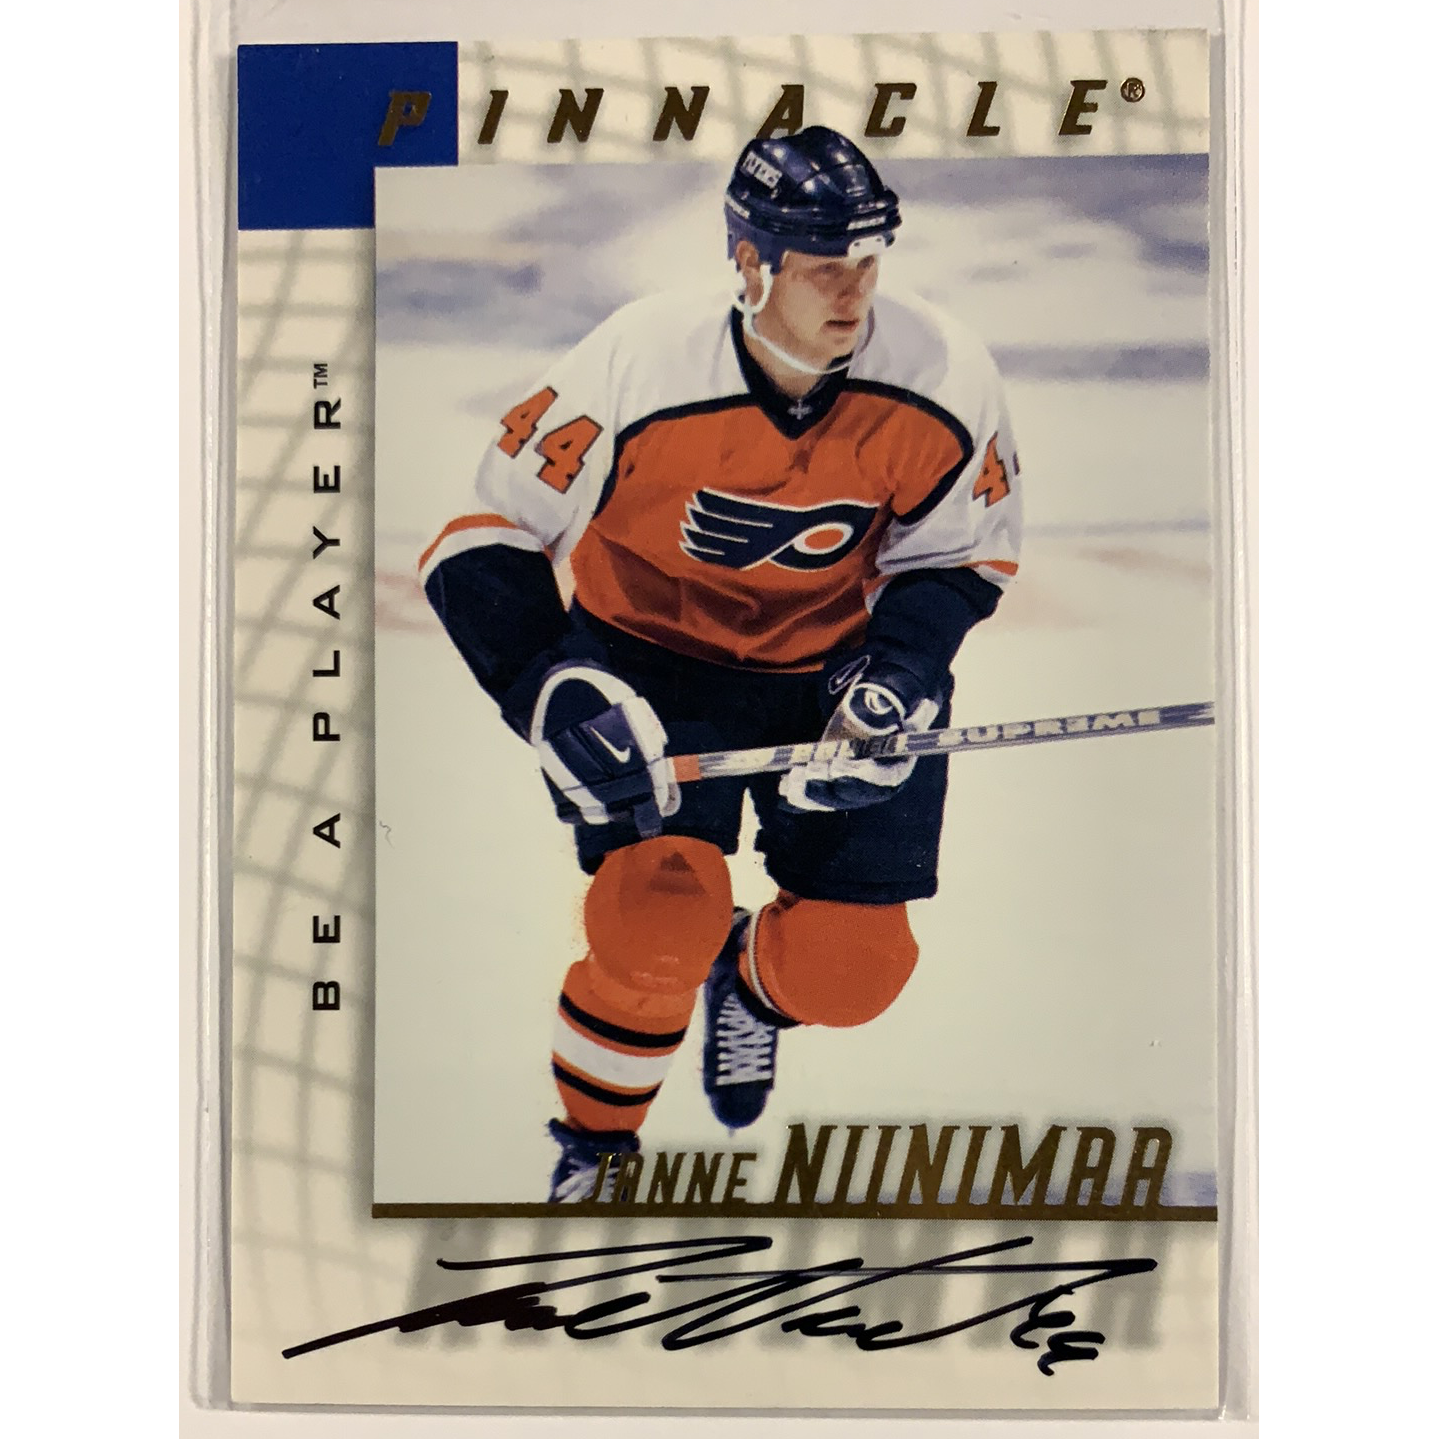  1998-99 Pinnacle Be A Player Janne Niinimaa On Card Auto  Local Legends Cards & Collectibles